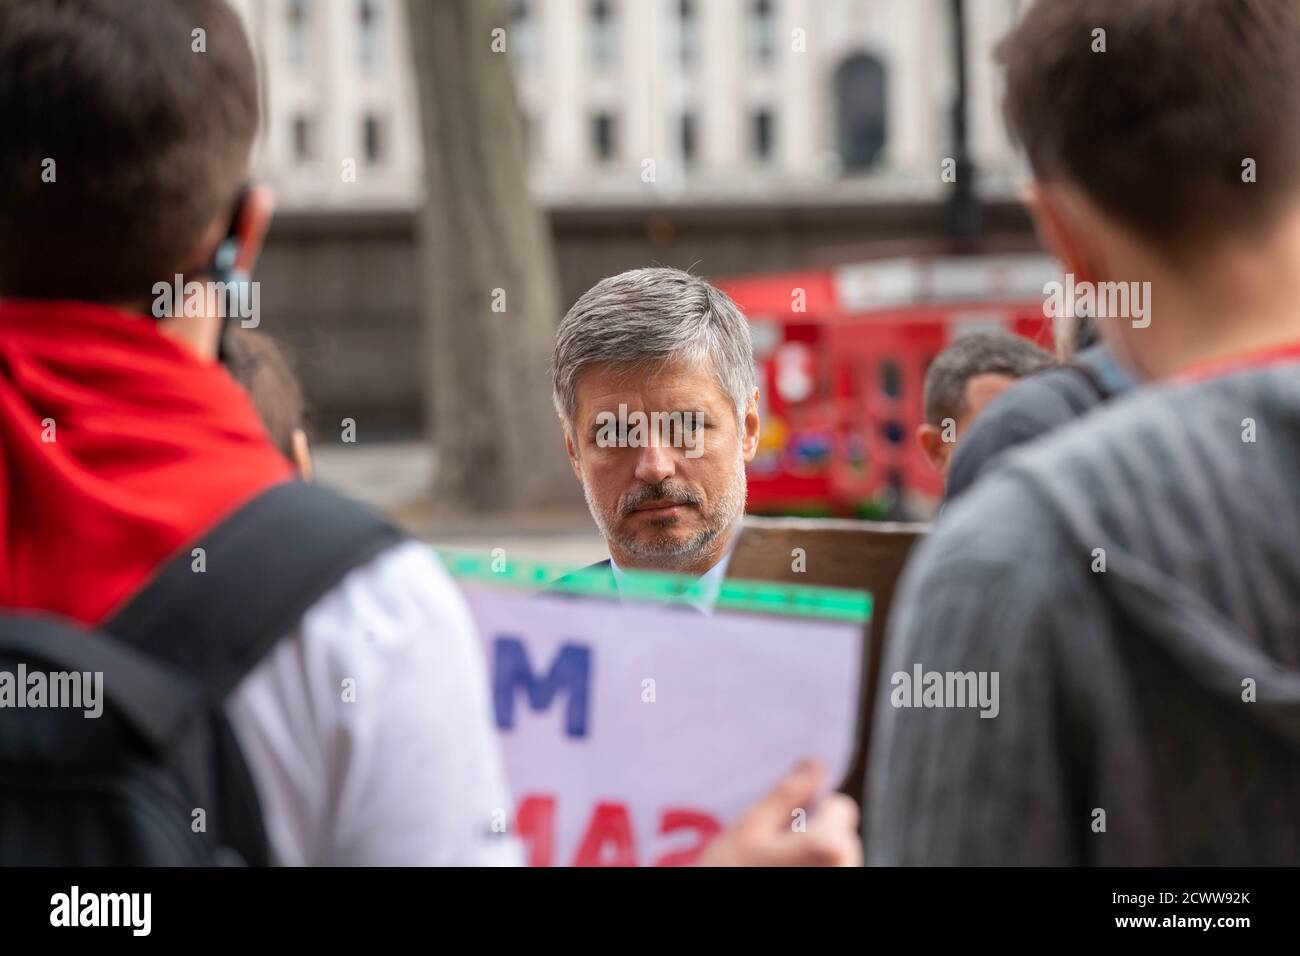 London, UK. 30th Sep, 2020. Vadym Prystaiko Ukraine's Ambassador Extraordinary and Plenipotentiary to the United Kingdom arrives at Portcullis House London where he engaged with protesters against the current regime in Belarus Credit: Ian Davidson/Alamy Live News Stock Photo